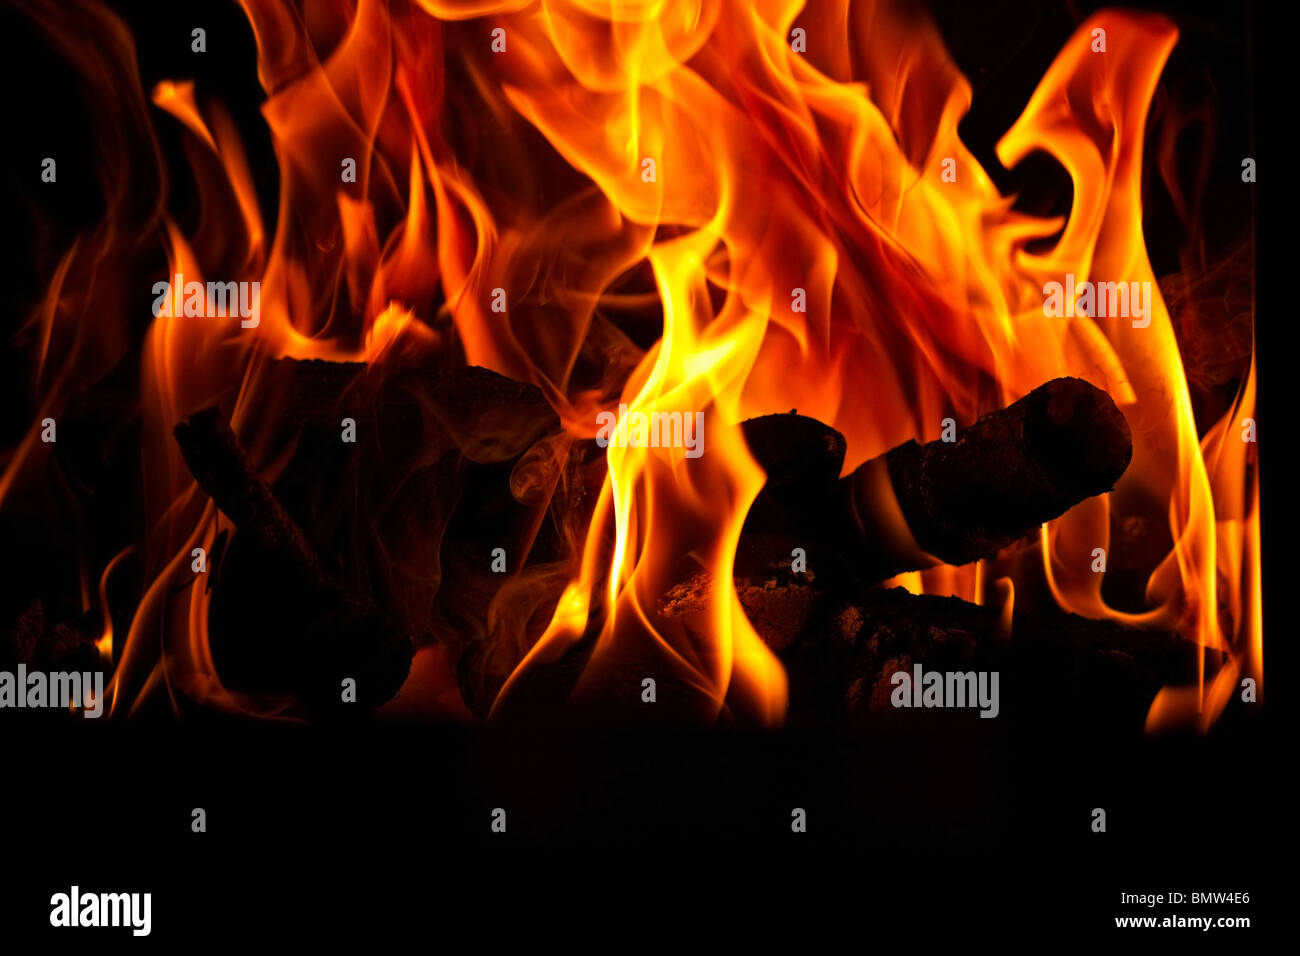 Burning logs silhouetted against flames in a hearth. Stock Photo